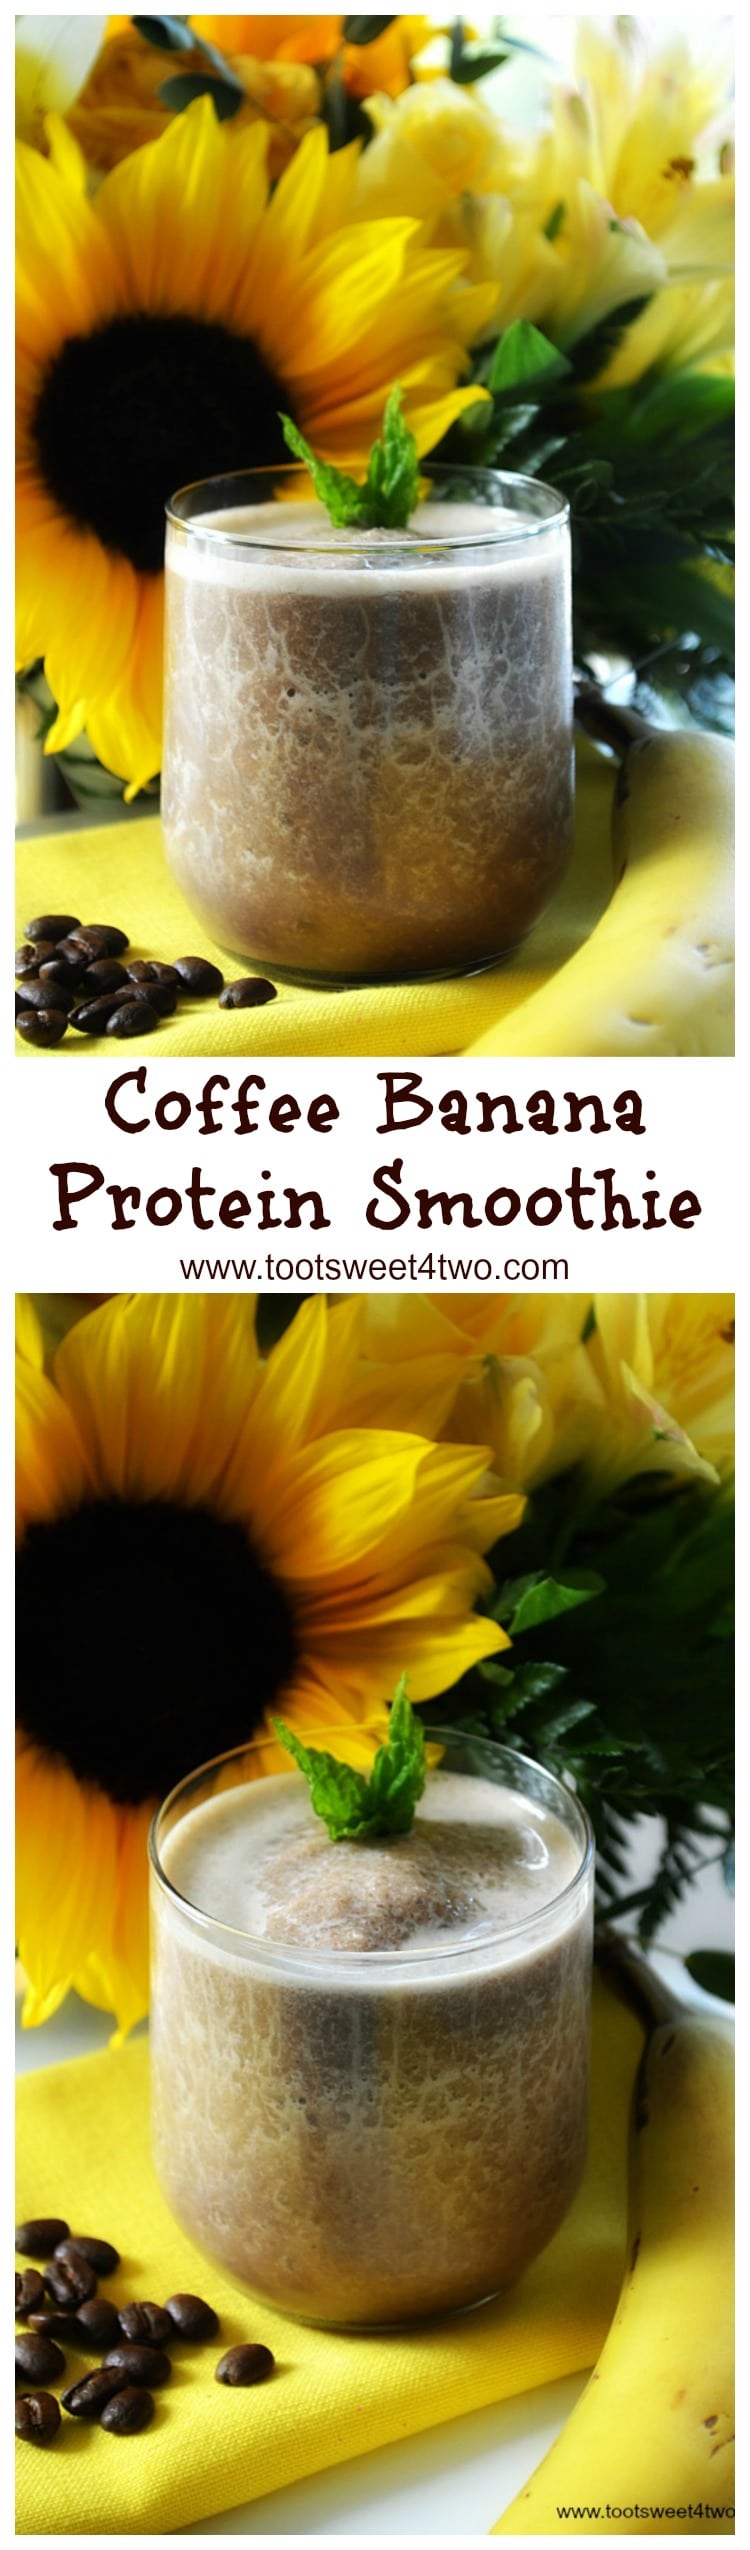 Coffee Banana Protein Smoothie - an easy, delicious and healthy way to start your morning. Coffee, whey protein powder and two more surprise ingredients supply the energy and a serving of fruit, a frozen banana, makes it the perfect blender breakfast. Whether you are watching calories for weight loss or just need a quick breakfast with extra protein, this recipe delivers. | www.tootsweet4two.com